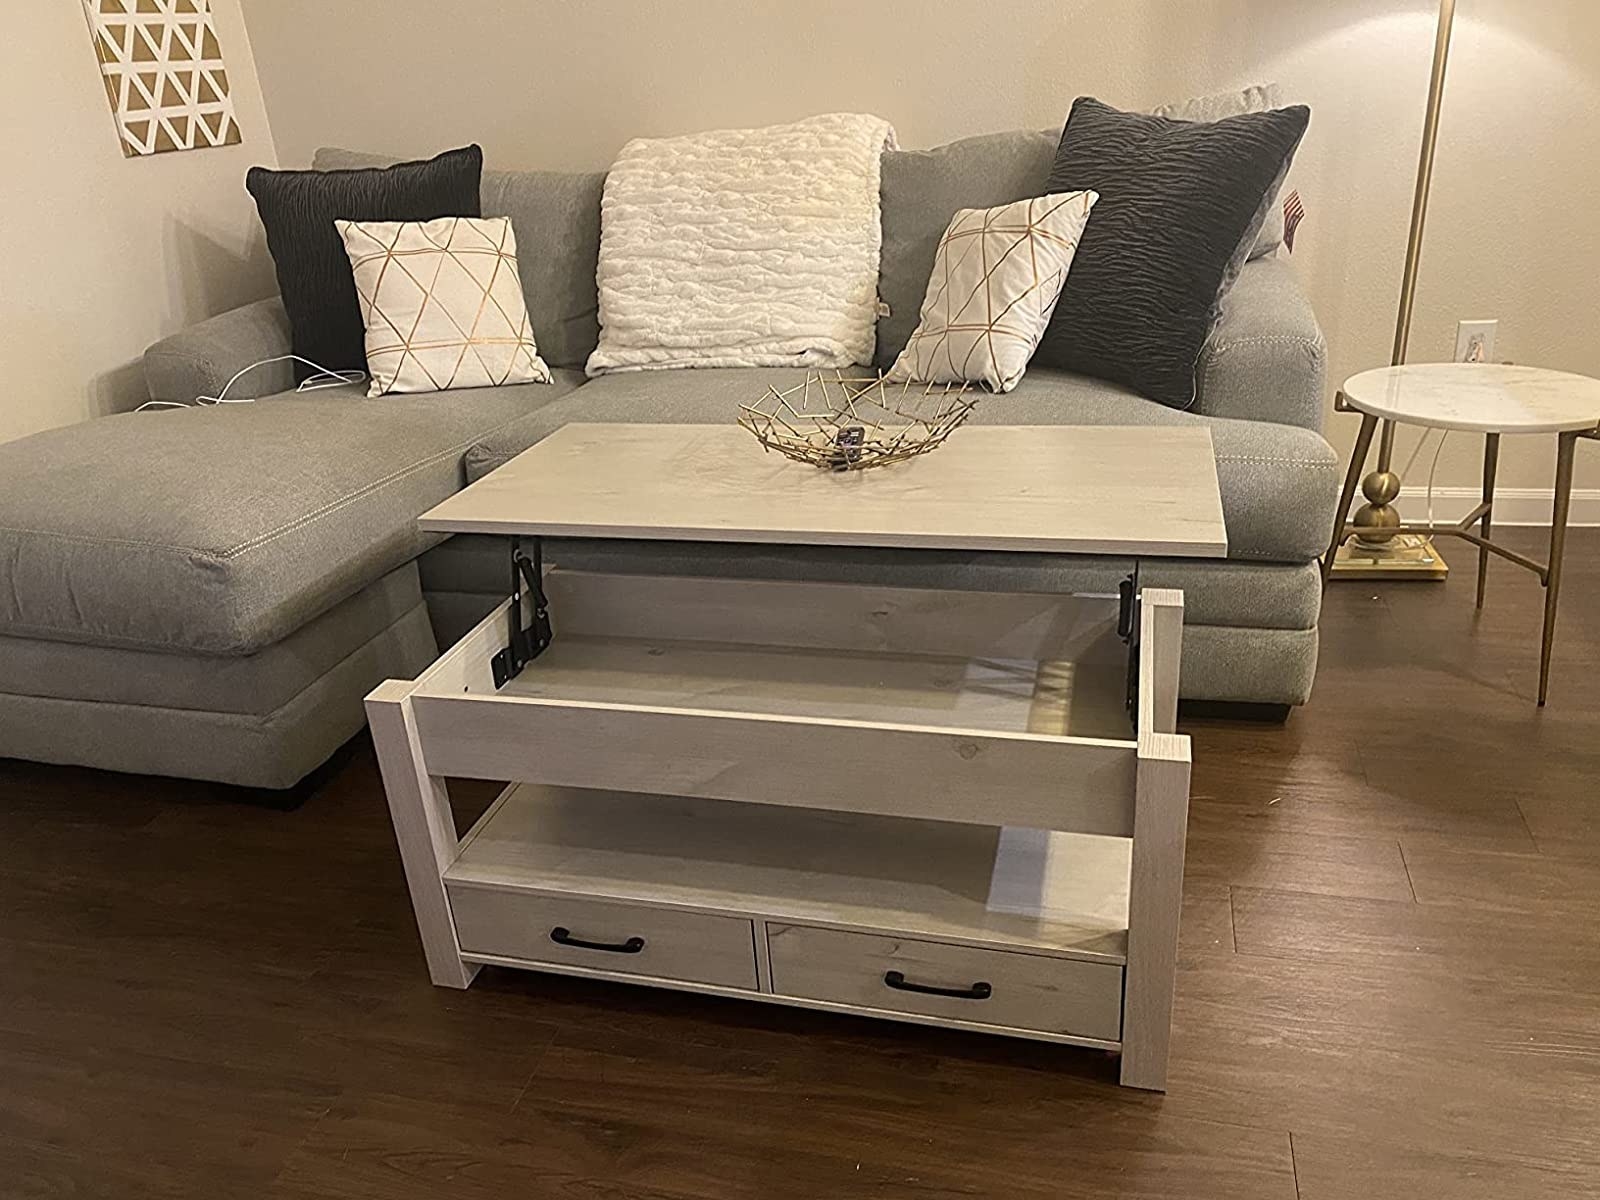 Reviewer image of lift-top coffee table in a gray and white living room